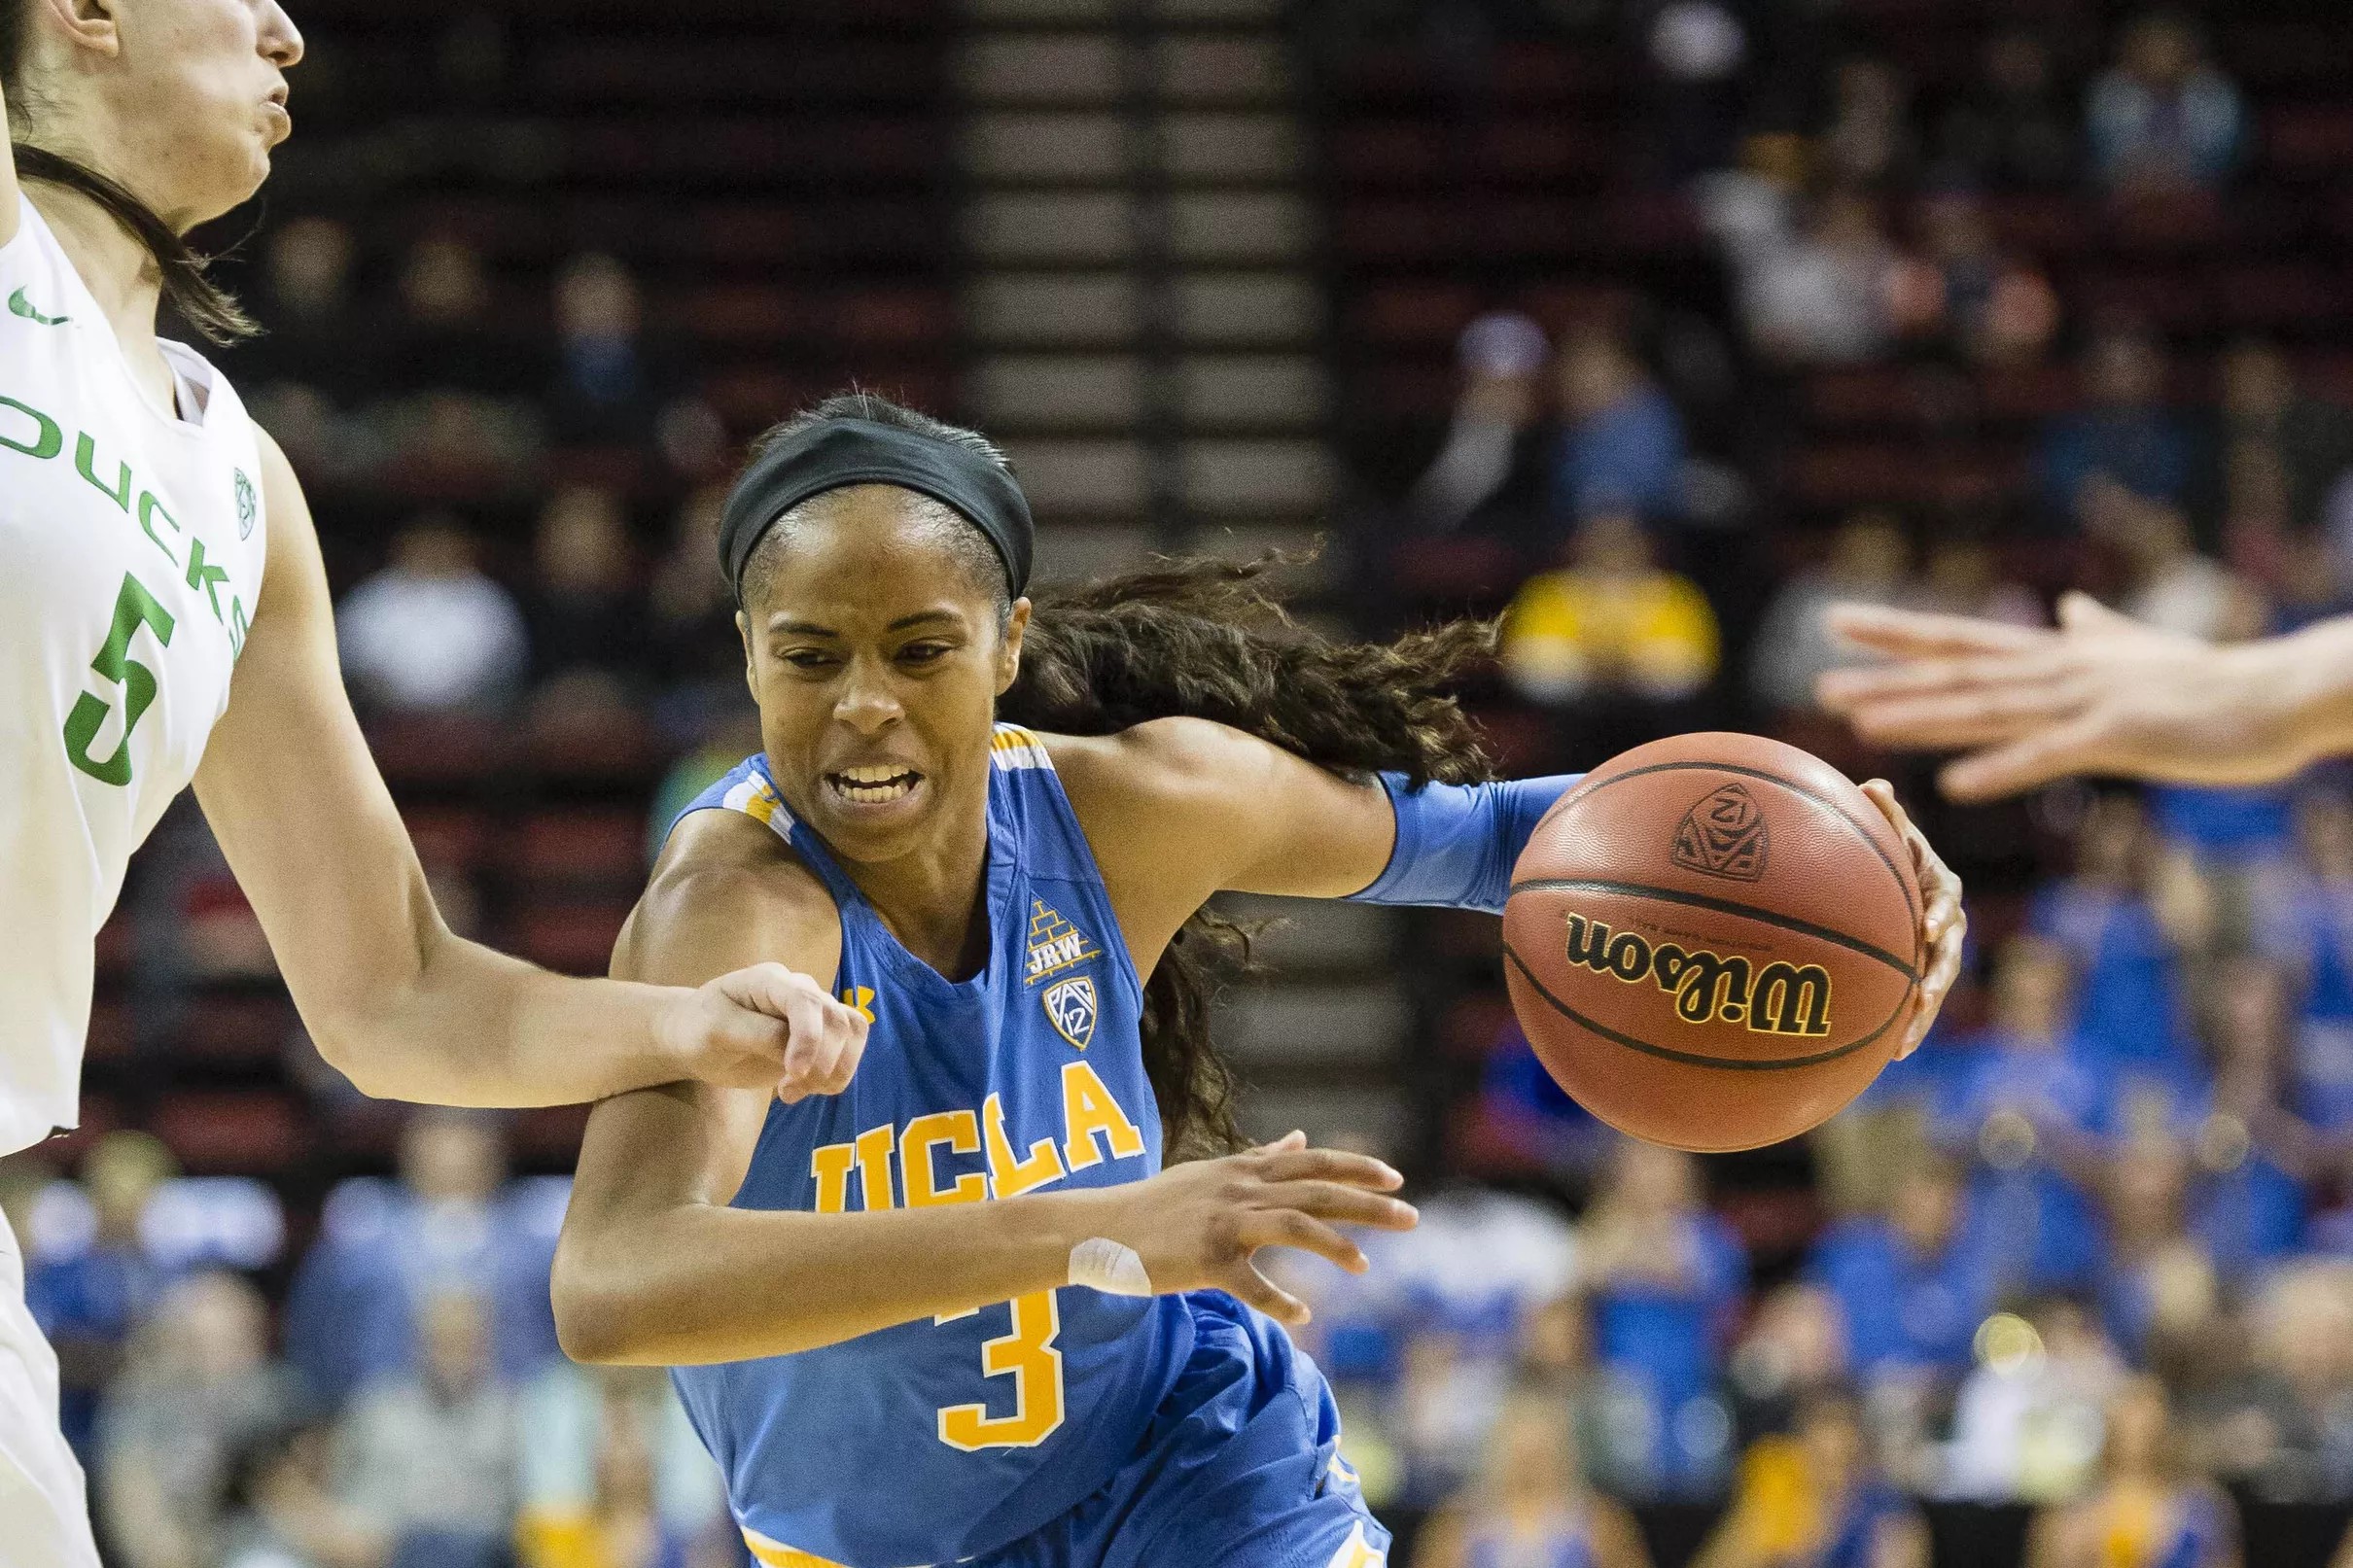 UCLA Women’s Basketball Earns a 3 Seed, Will Host First Two Games